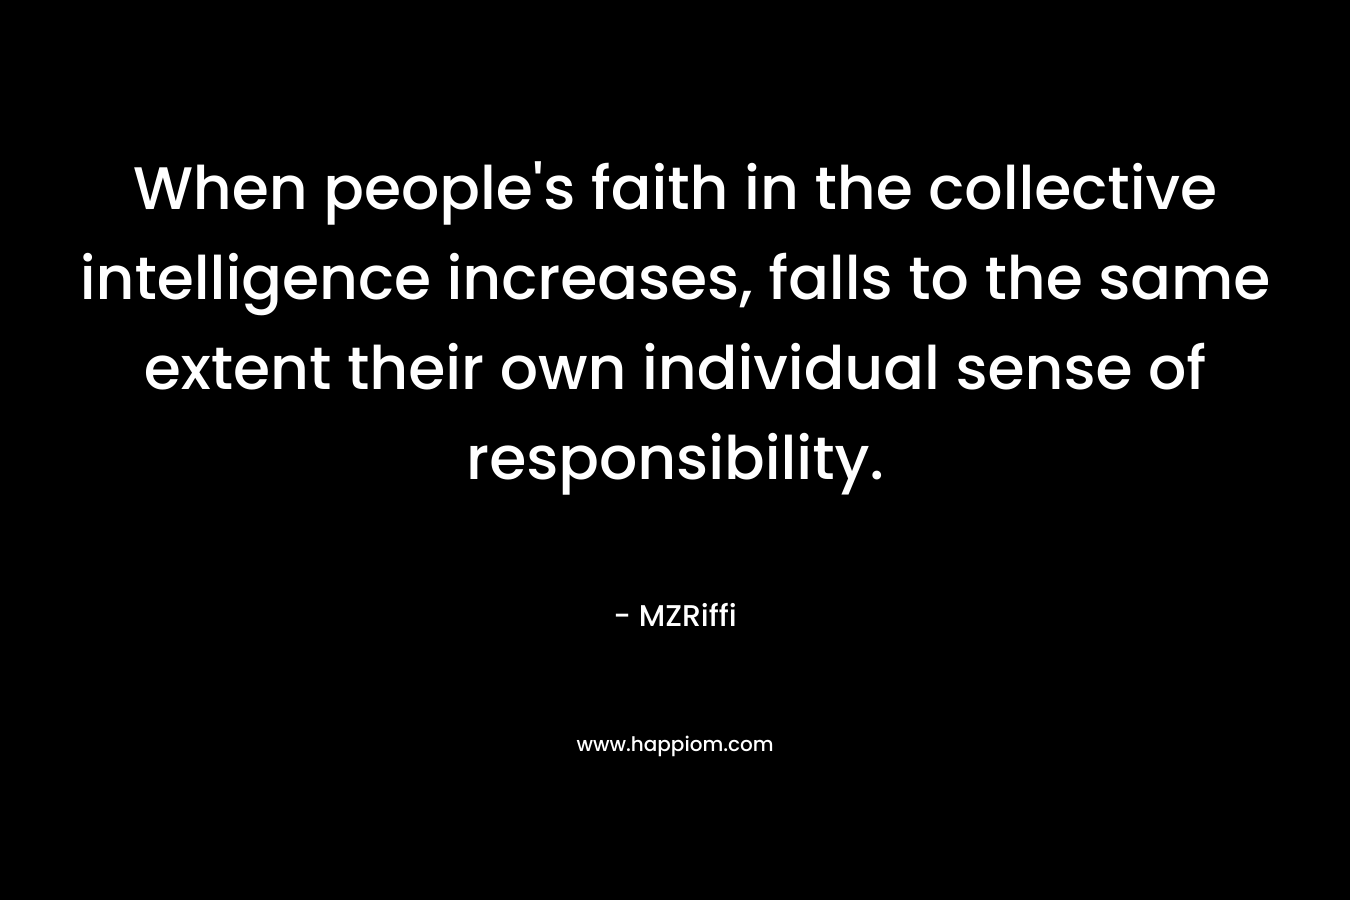 When people’s faith in the collective intelligence increases, falls to the same extent their own individual sense of responsibility. – MZRiffi